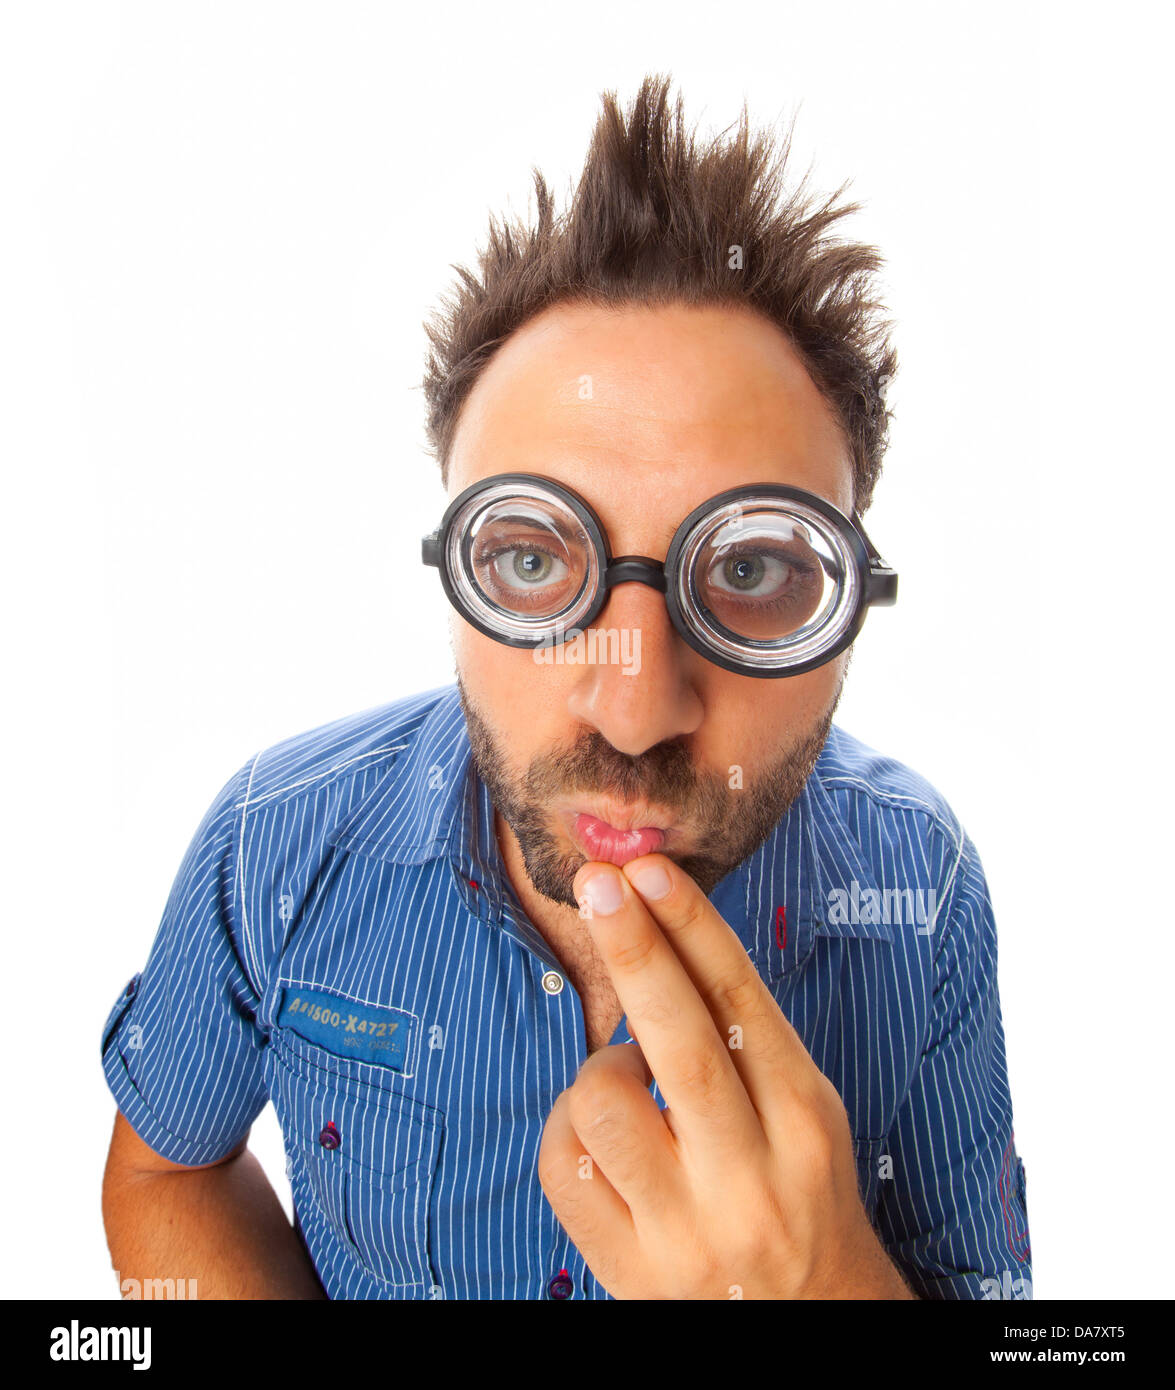 Young boy with a surprised expression with eye glasses Stock Photo